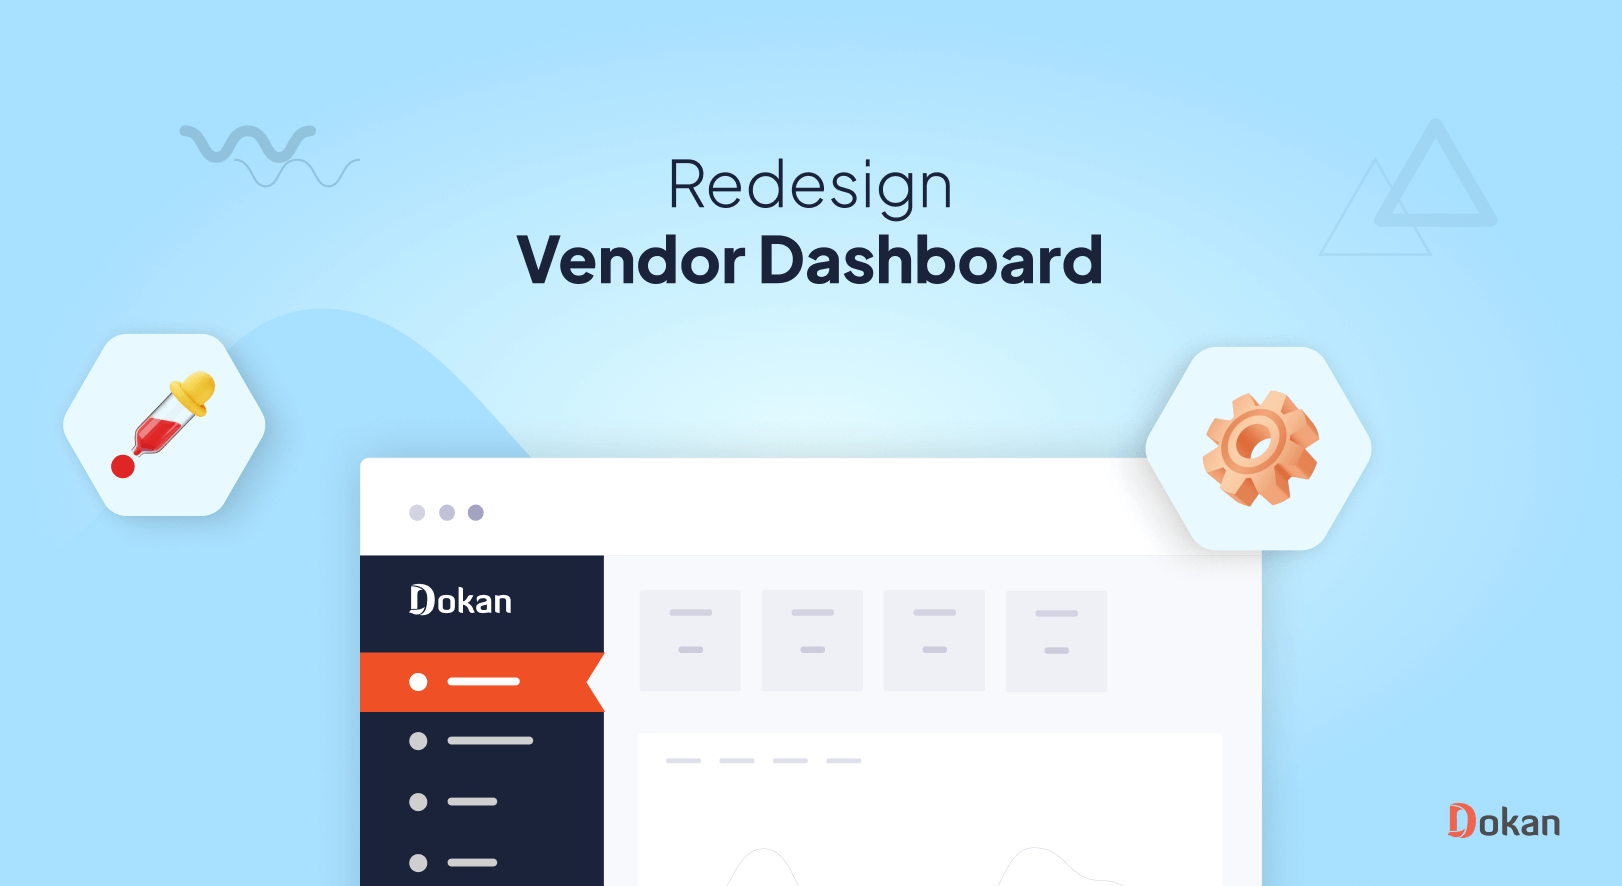 This is the feature image of the blog how to redesign vendor dashboard